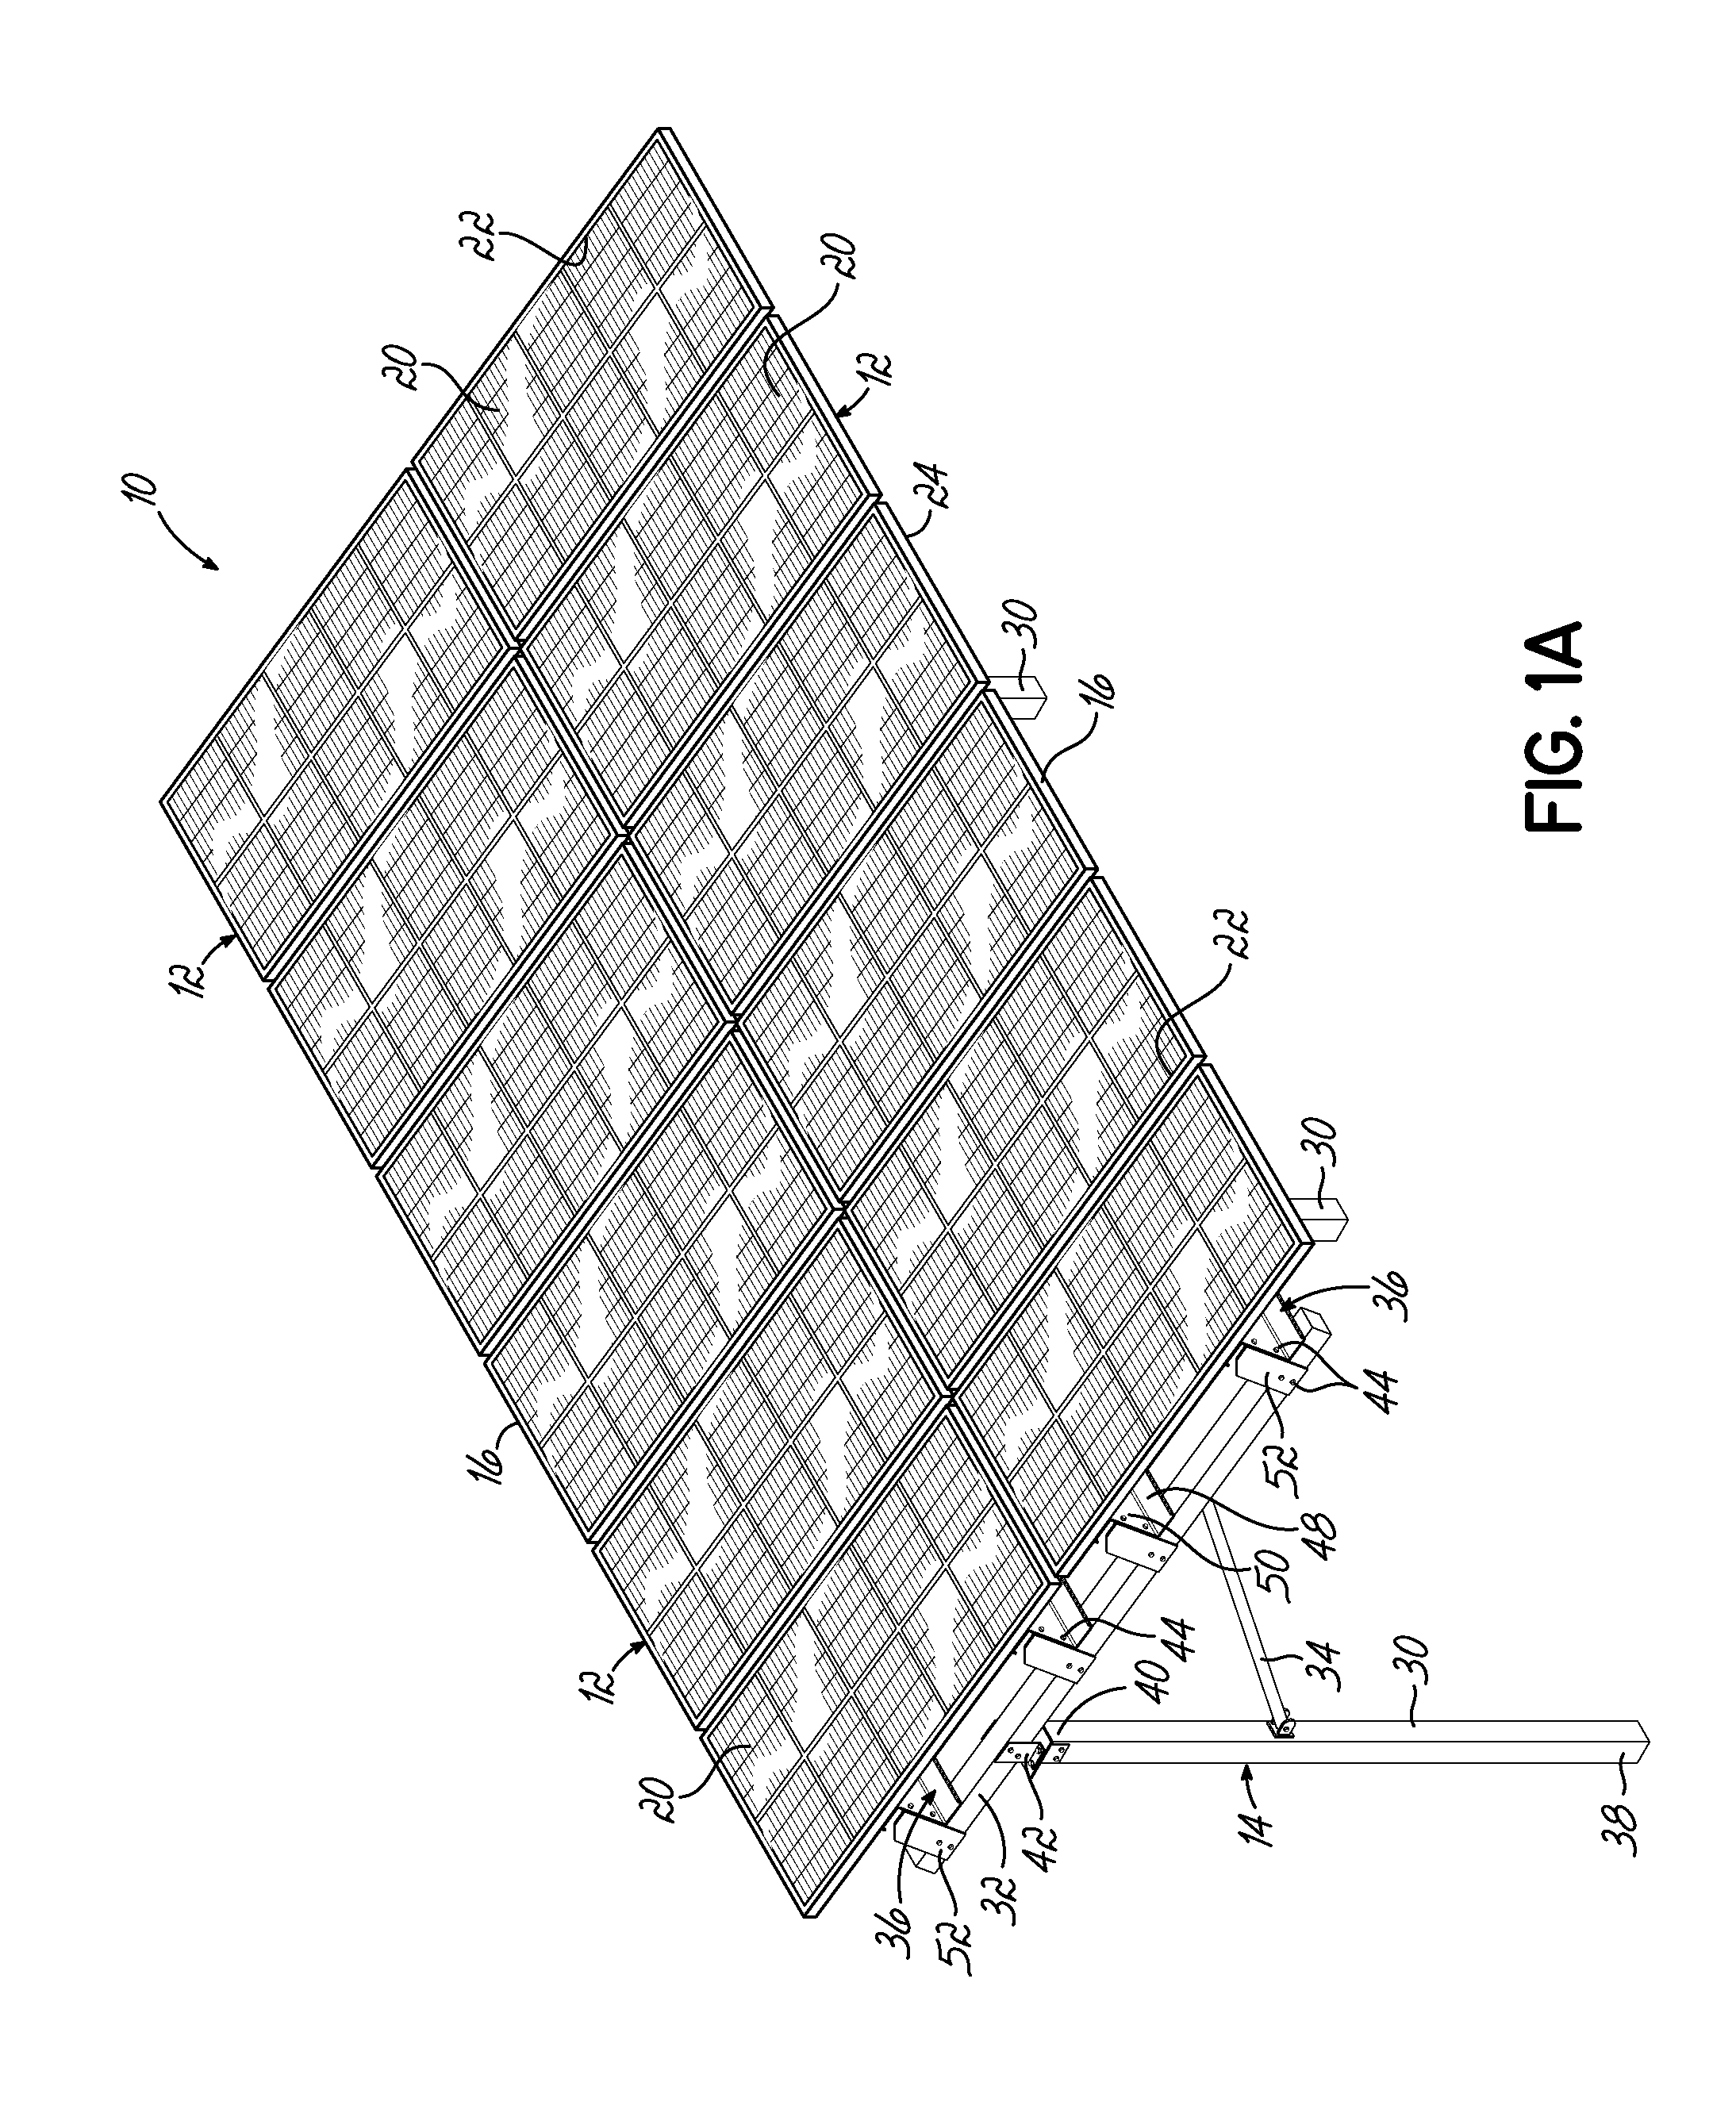 Solar mounting system having automatic grounding and associated methods